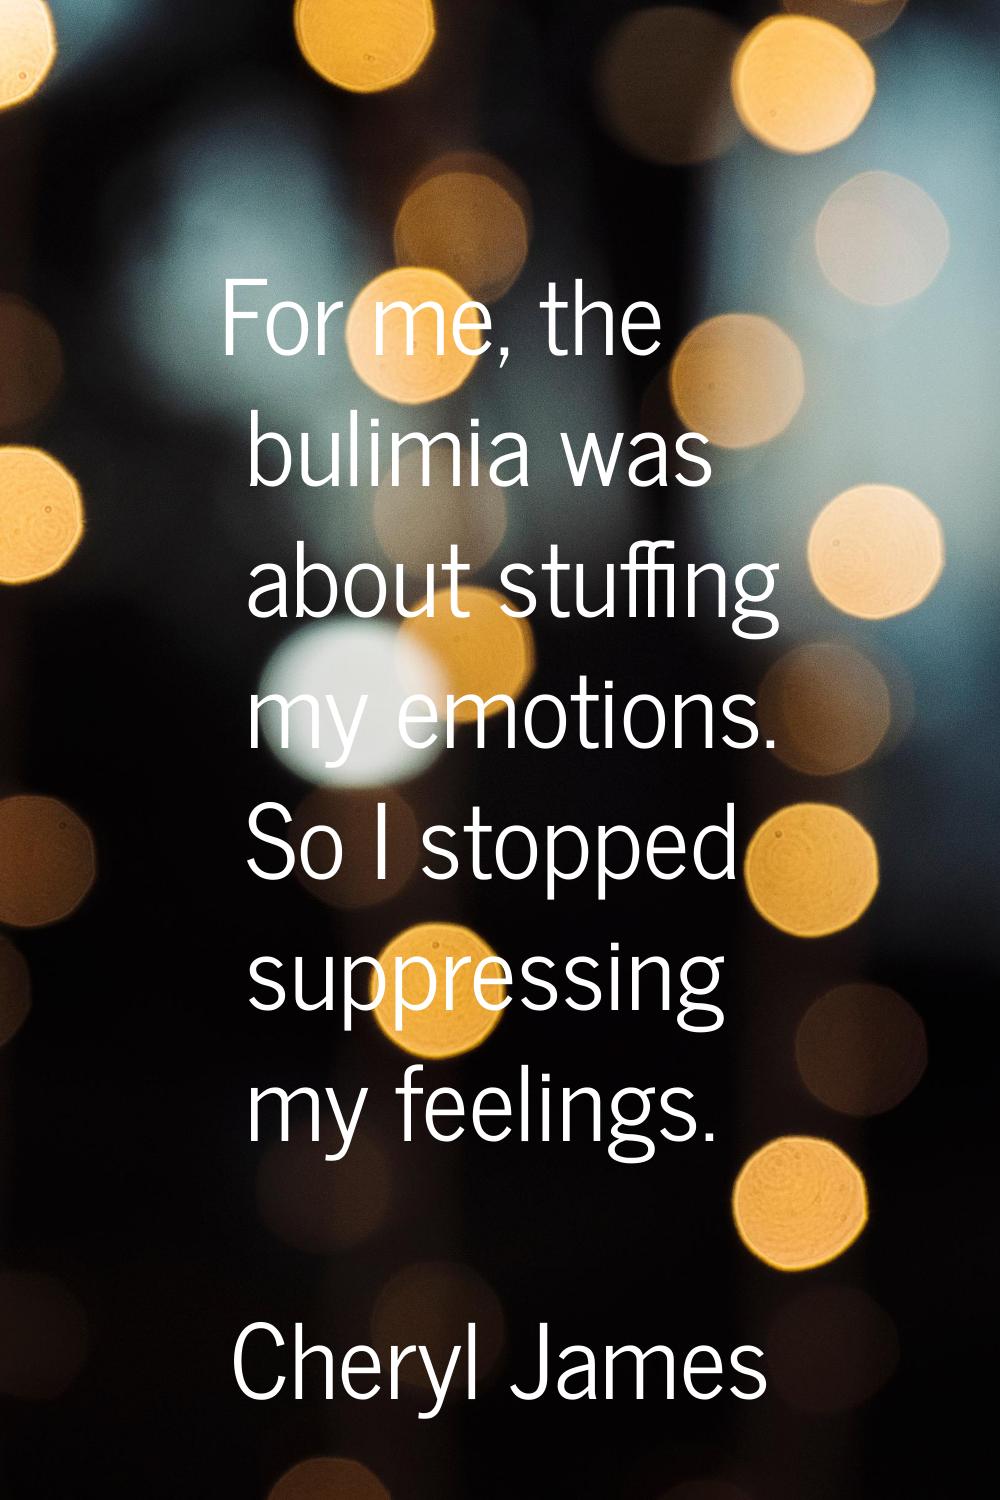 For me, the bulimia was about stuffing my emotions. So I stopped suppressing my feelings.